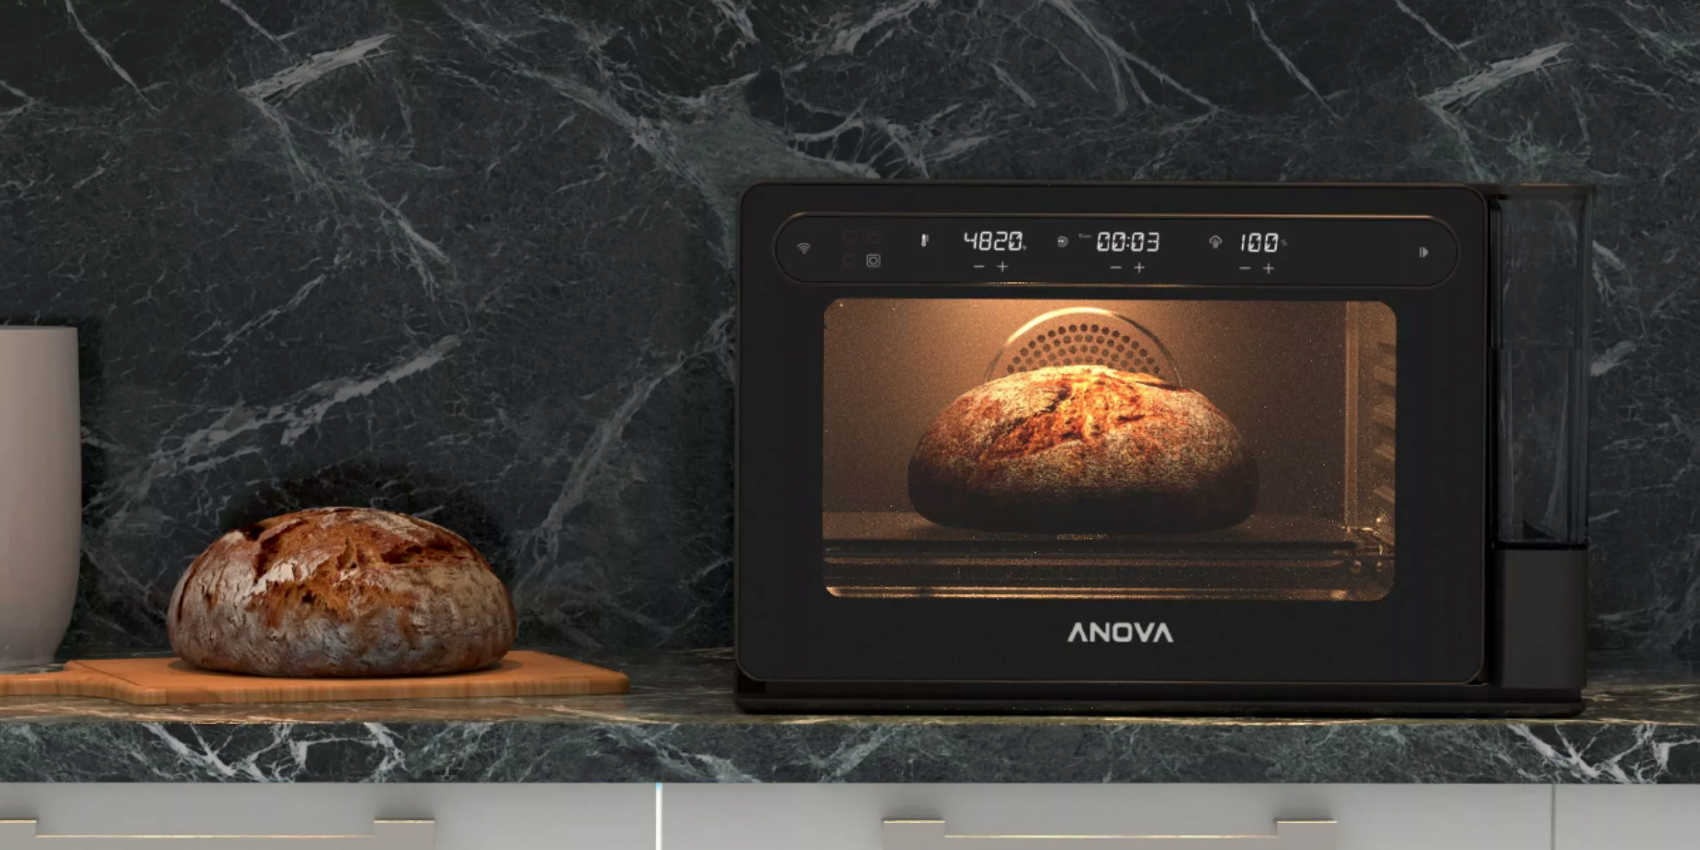 Anova's Precision Smart Oven has a built-in sous vide mode, more